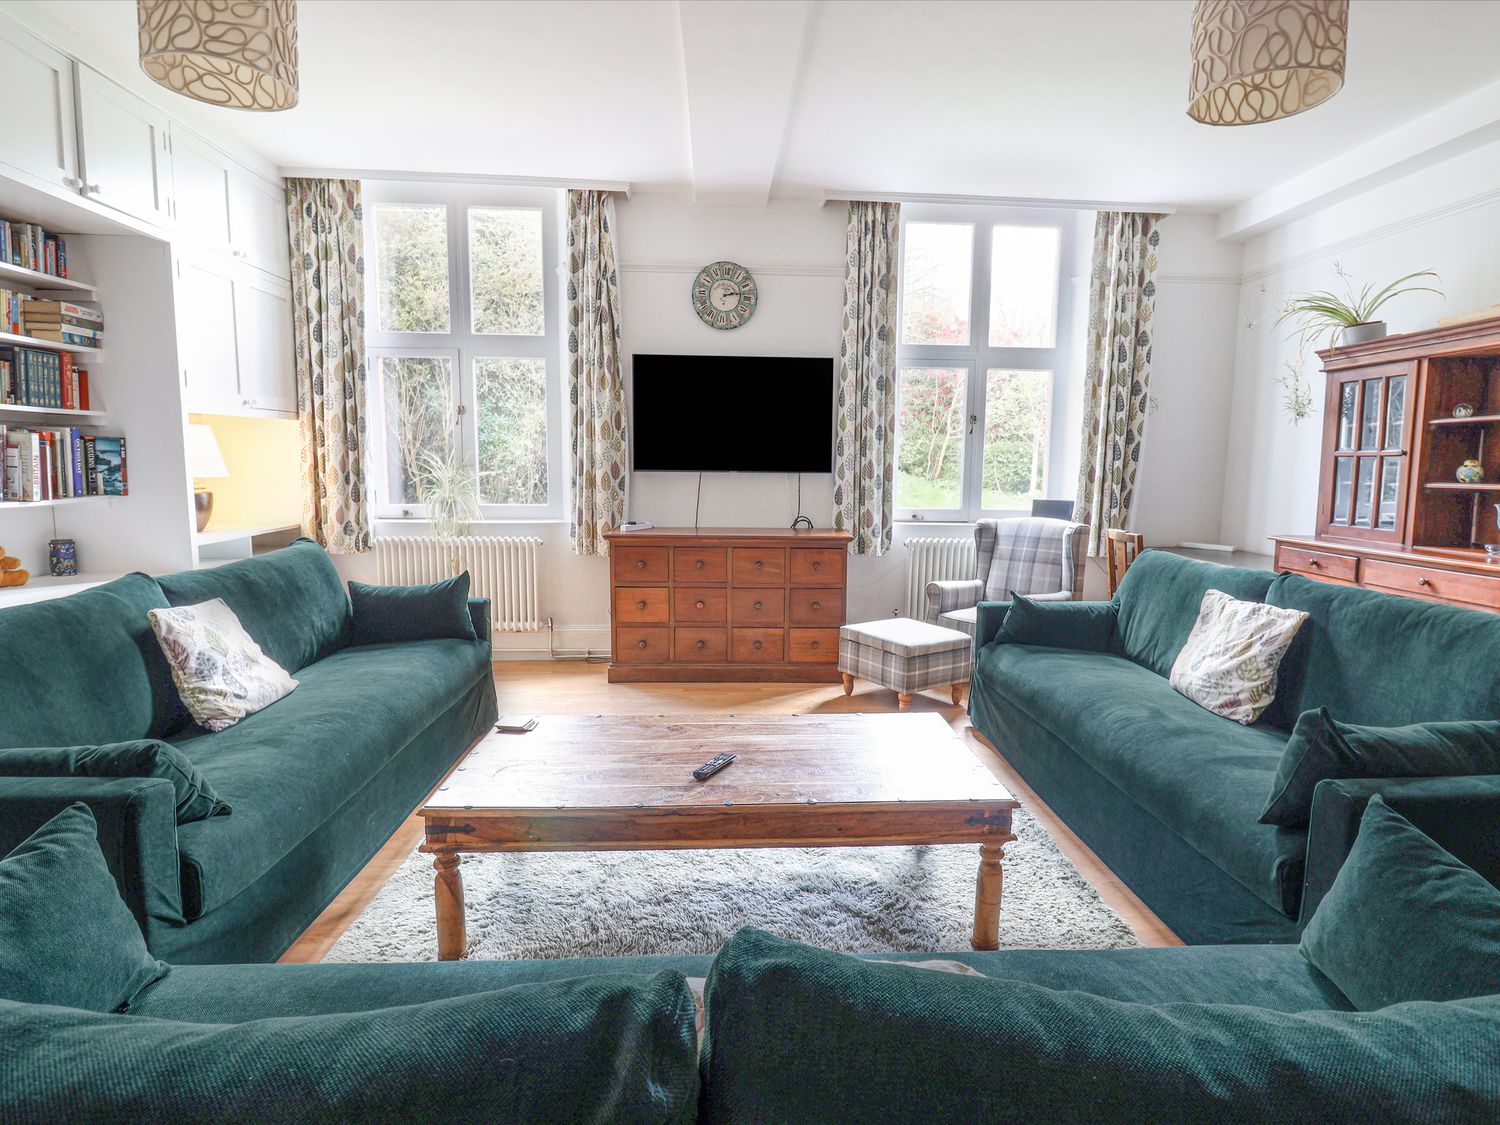 Red House, near Lyme Regis, Devon/Dorset border. Large family home set in spacious grounds. Two pets